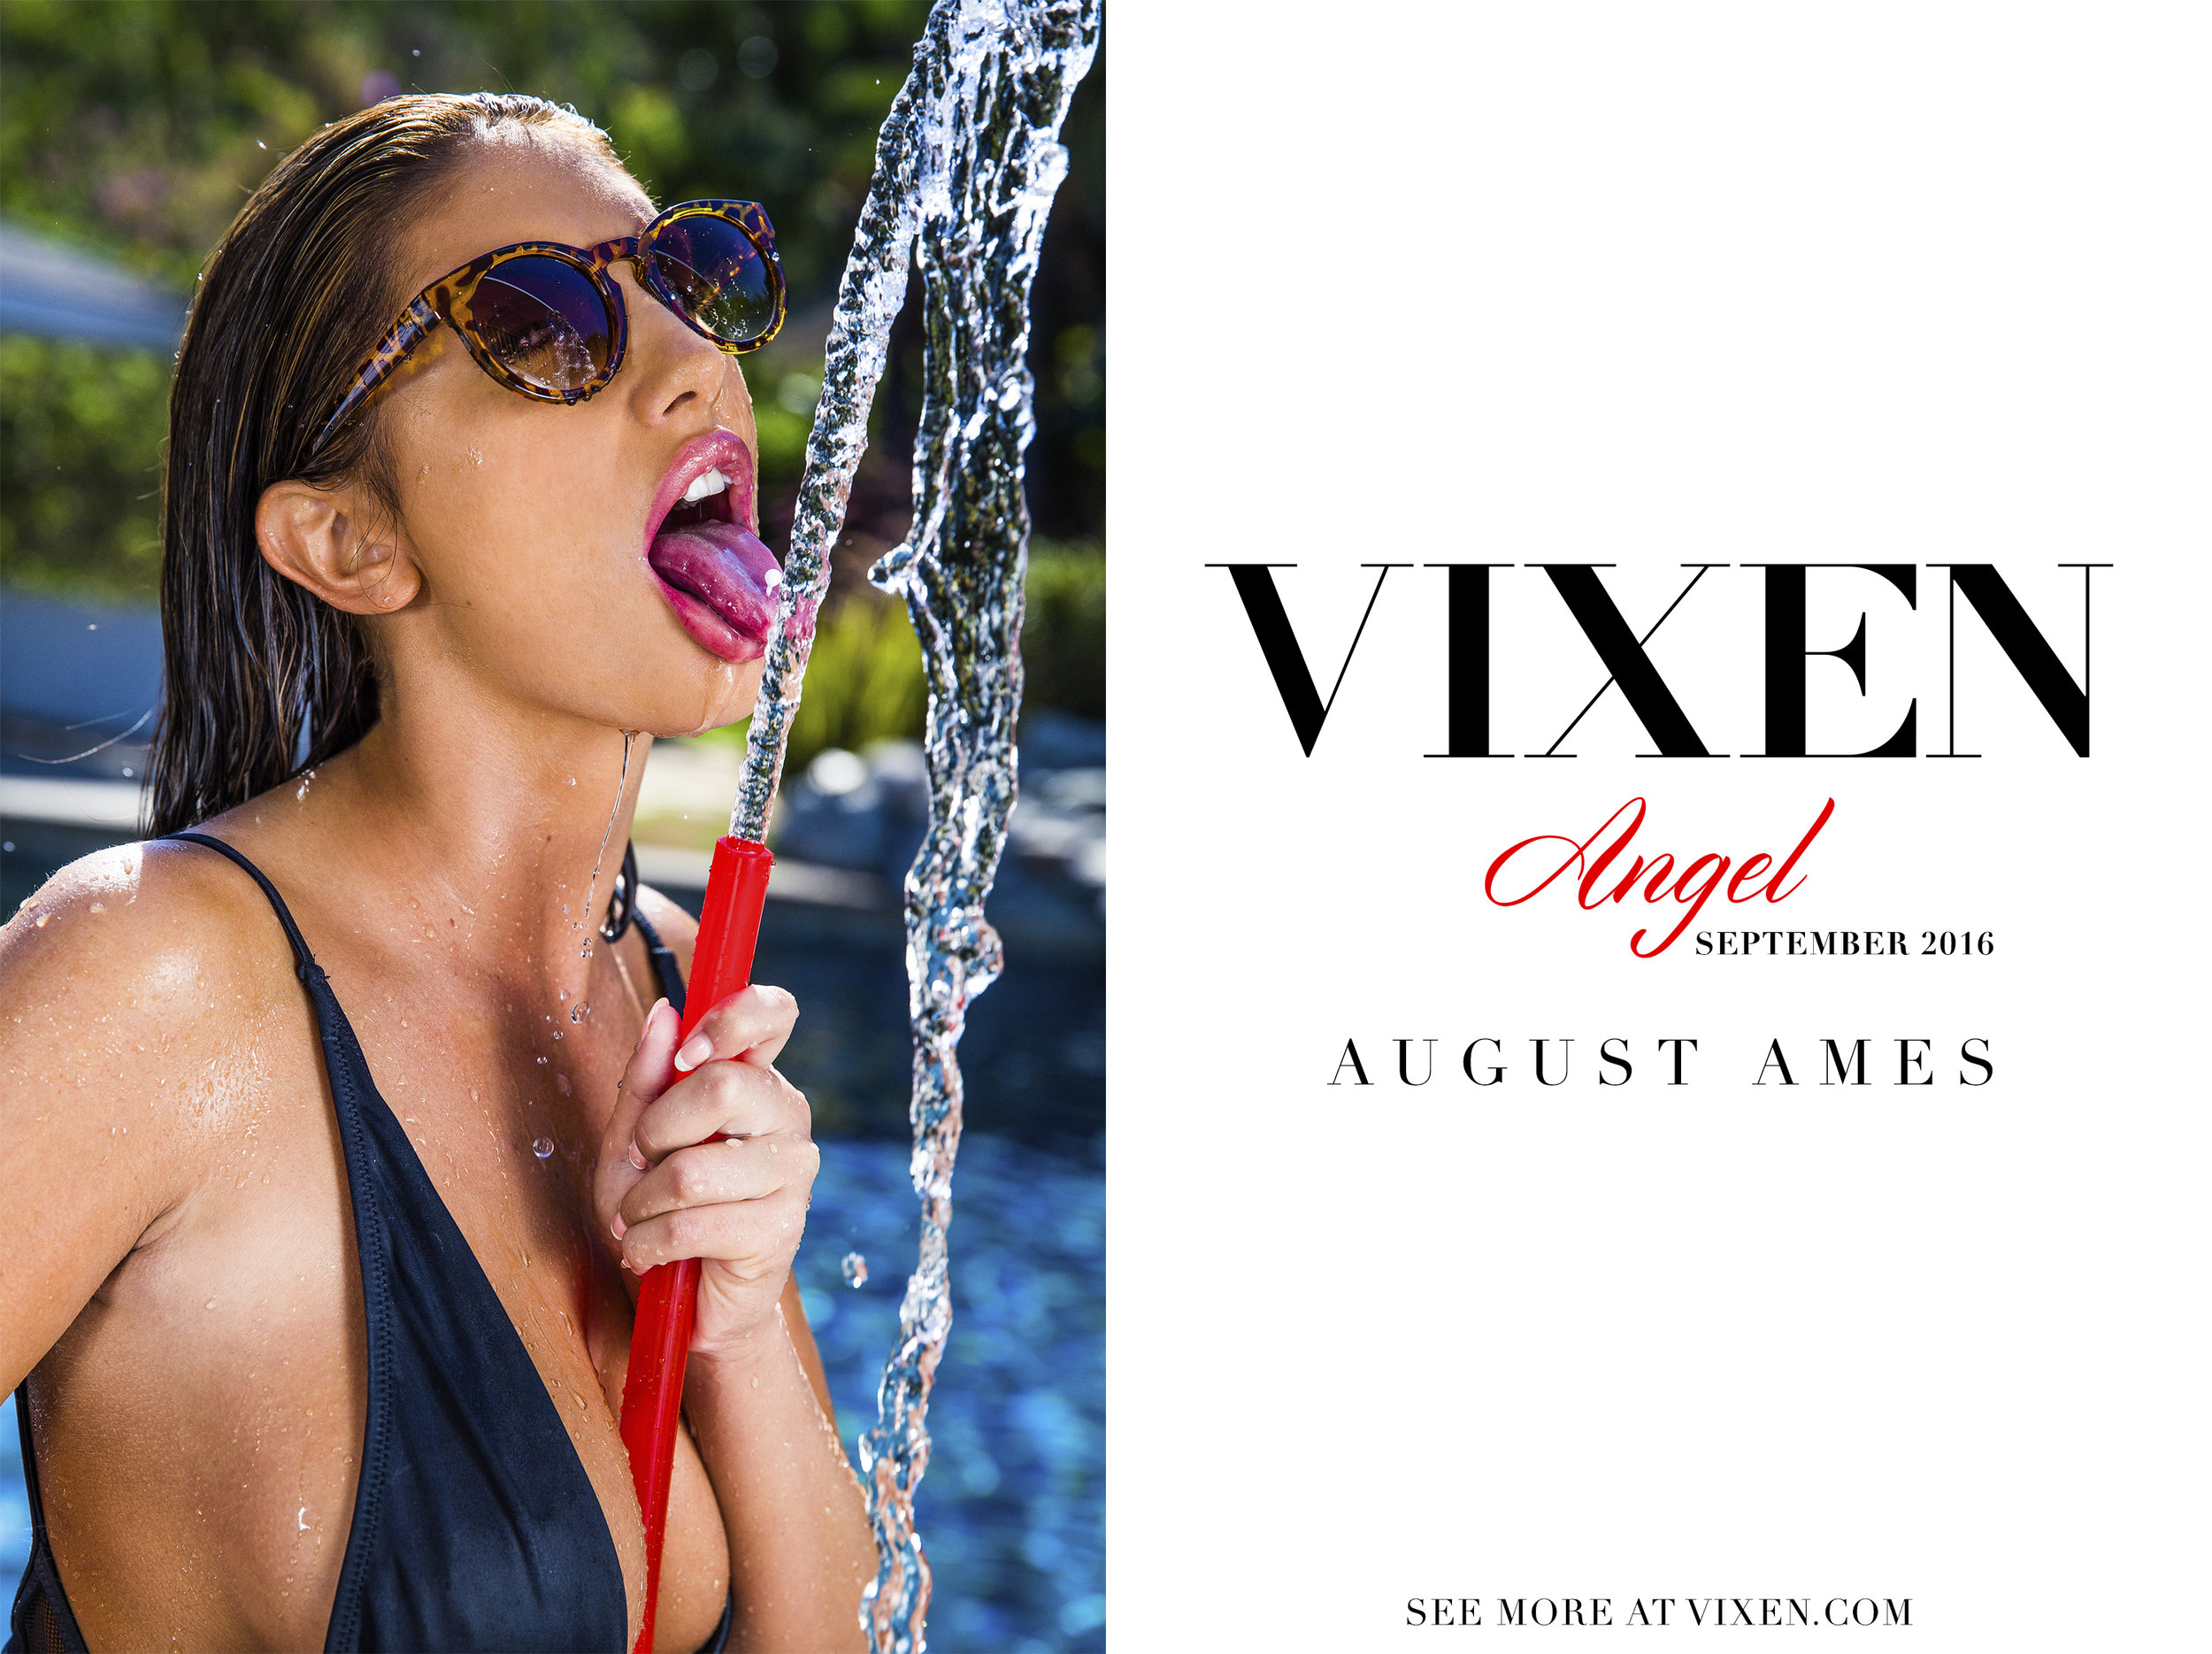 Vixen is very exclusive in everything that they do so I knew that just shoo...